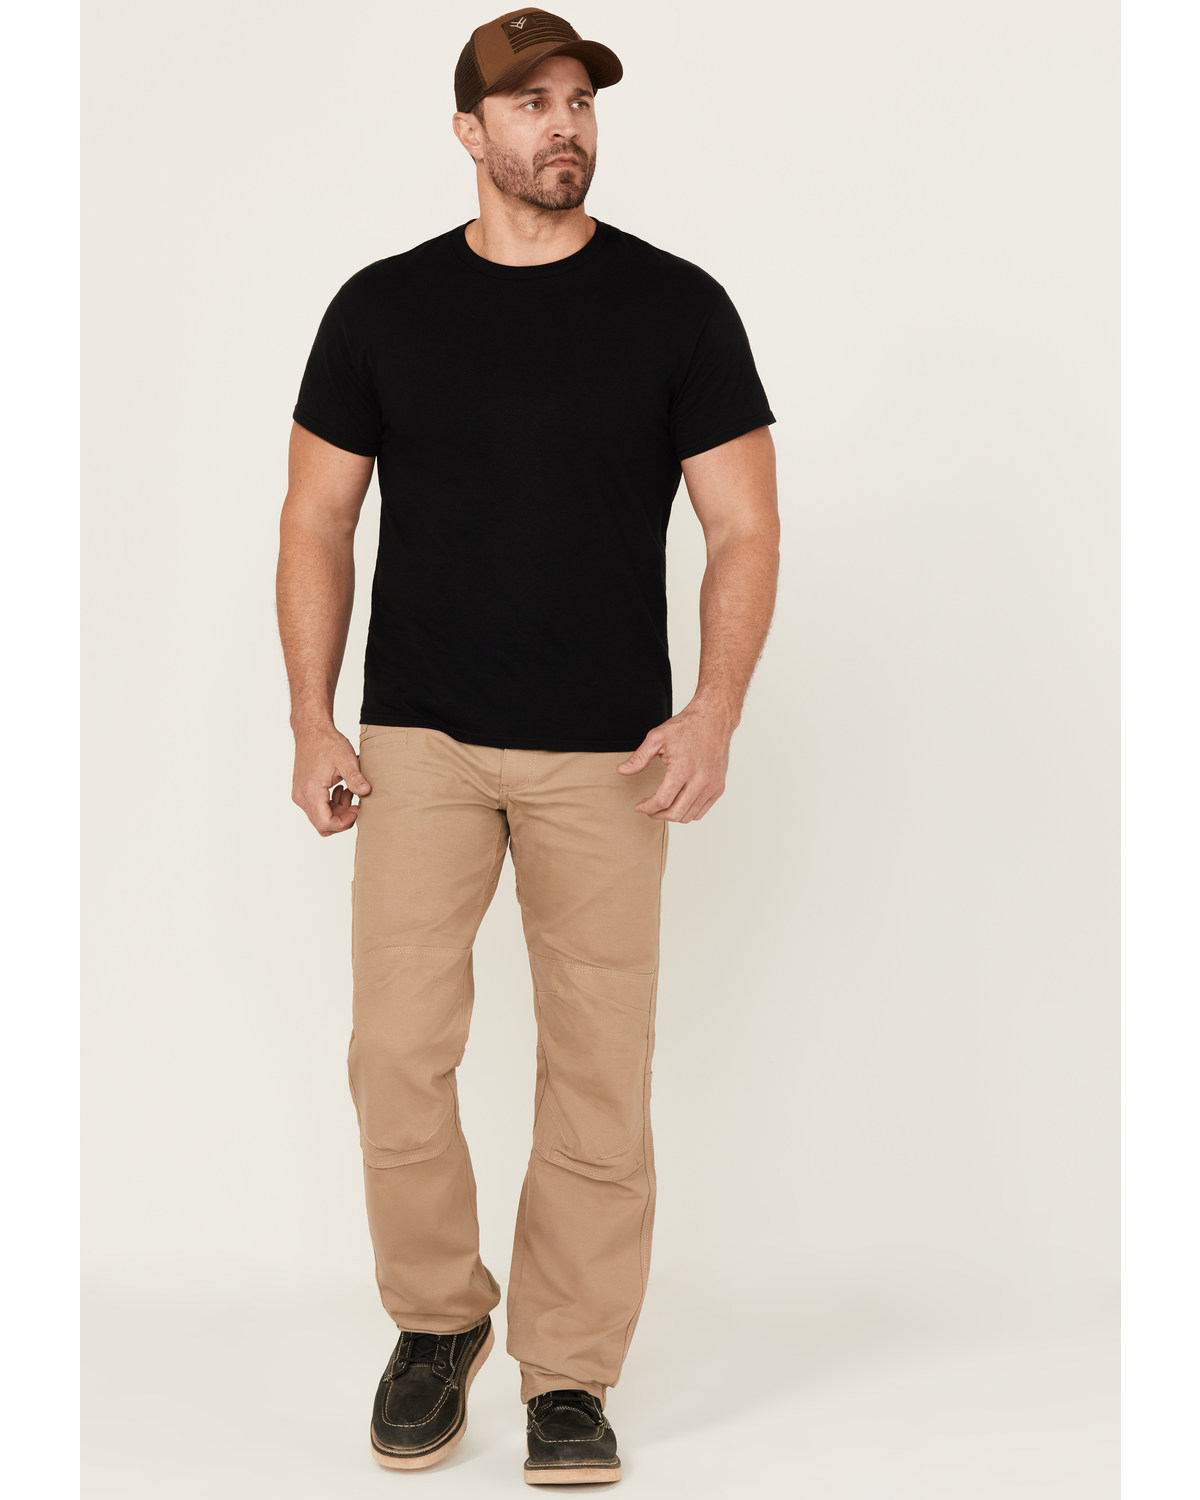 Hawx Men's All Out Work Pants